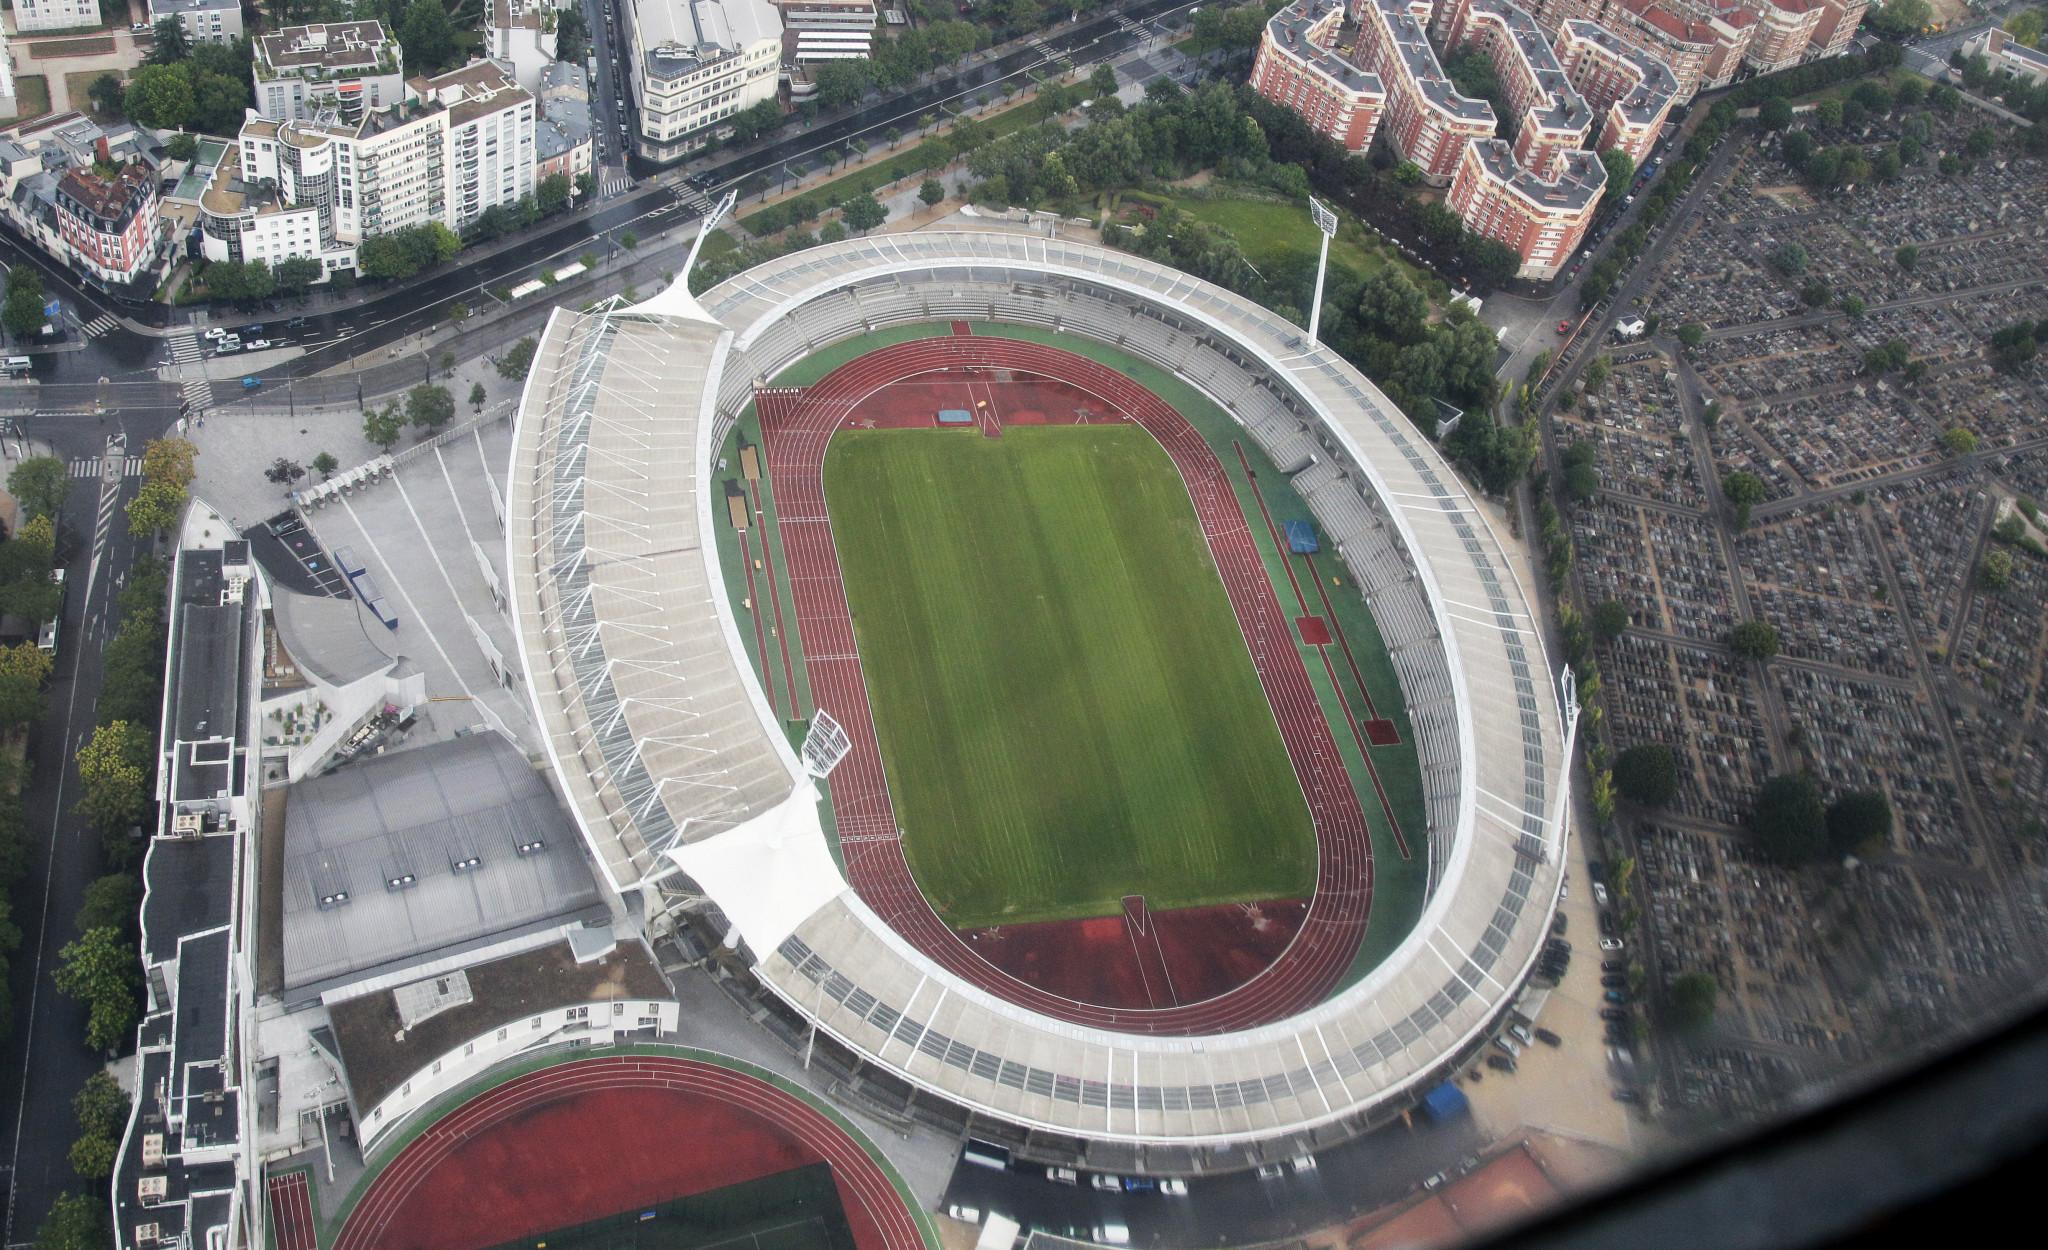 The Charlety Stadium is set to host the Paris 2023 World Para Athletics Championships next year ©Getty Images